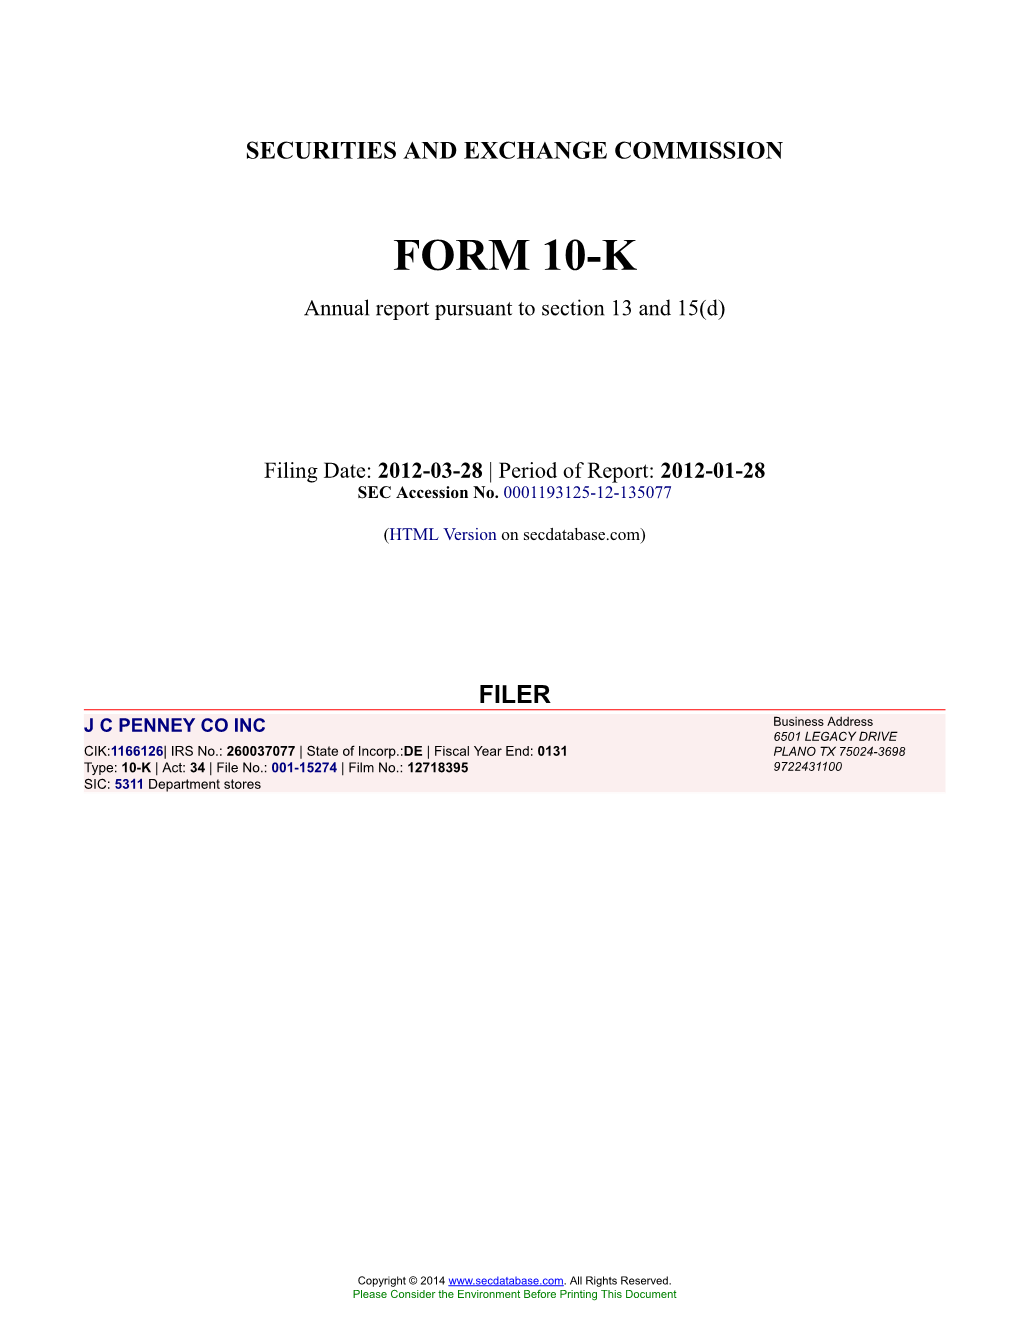 J C PENNEY CO INC Form 10-K Annual Report Filed 2012-03-28